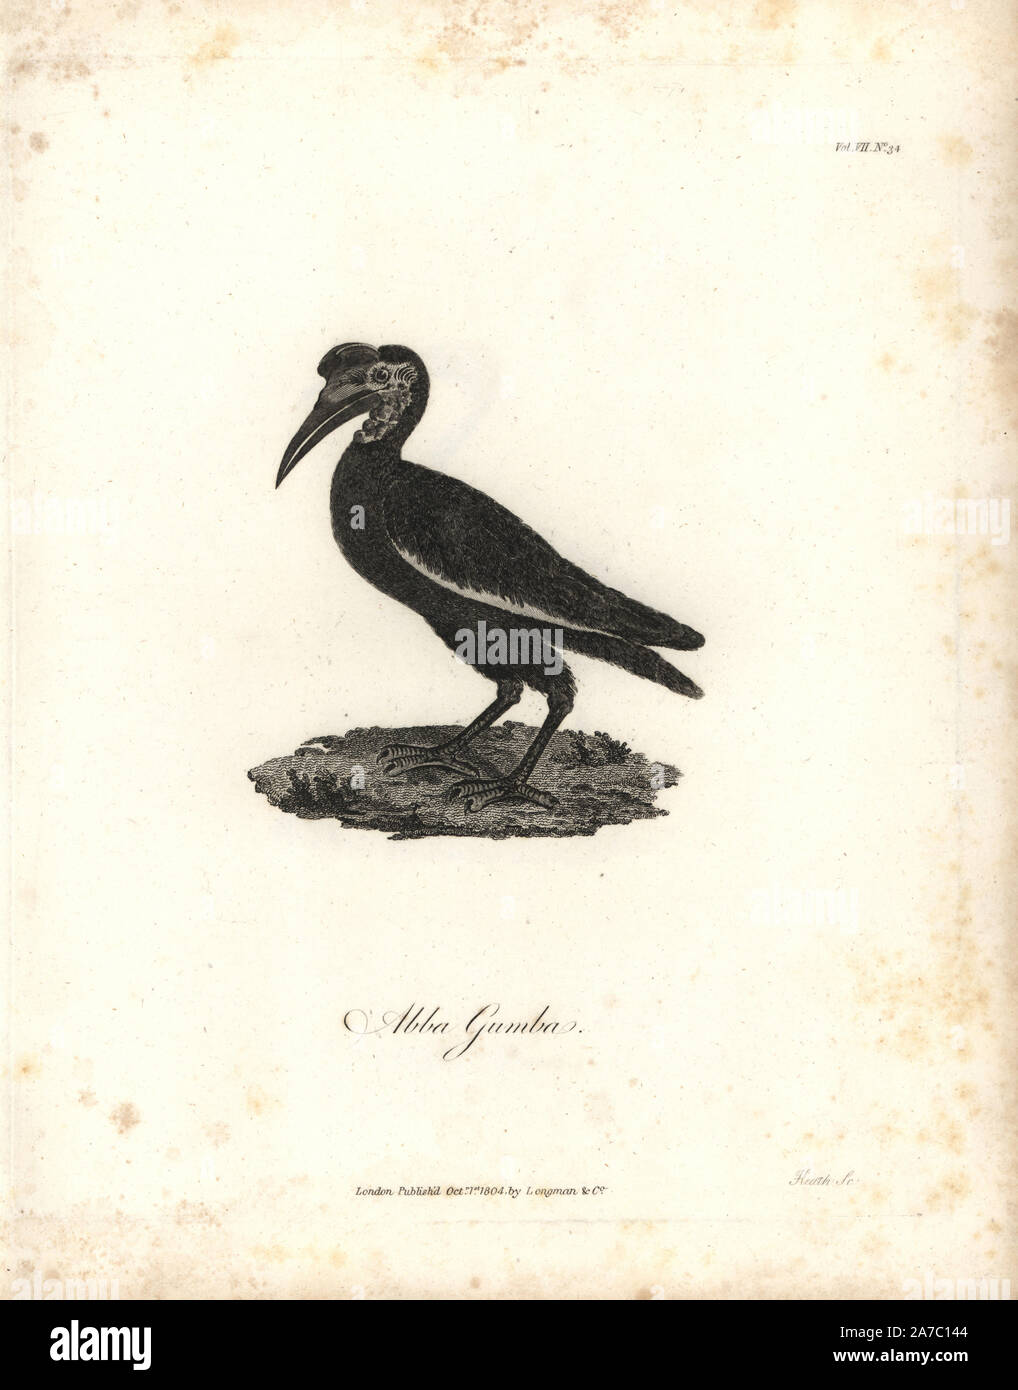 Abba gumba or erkoom, Abyssinian hornbill, Bucorvus abyssinicus. Copperplate engraving from James Bruce's 'Travels to Discover the Source of the Nile, in the years 1768, 1769, 1770, 1771, 1772 and 1773,' London, 1790. James Bruce (1730-1794) was a Scottish explorer and travel writer who spent more than 12 years in North Africa and Ethiopia. Engraved by Heath after an original drawing by Bruce. Stock Photo